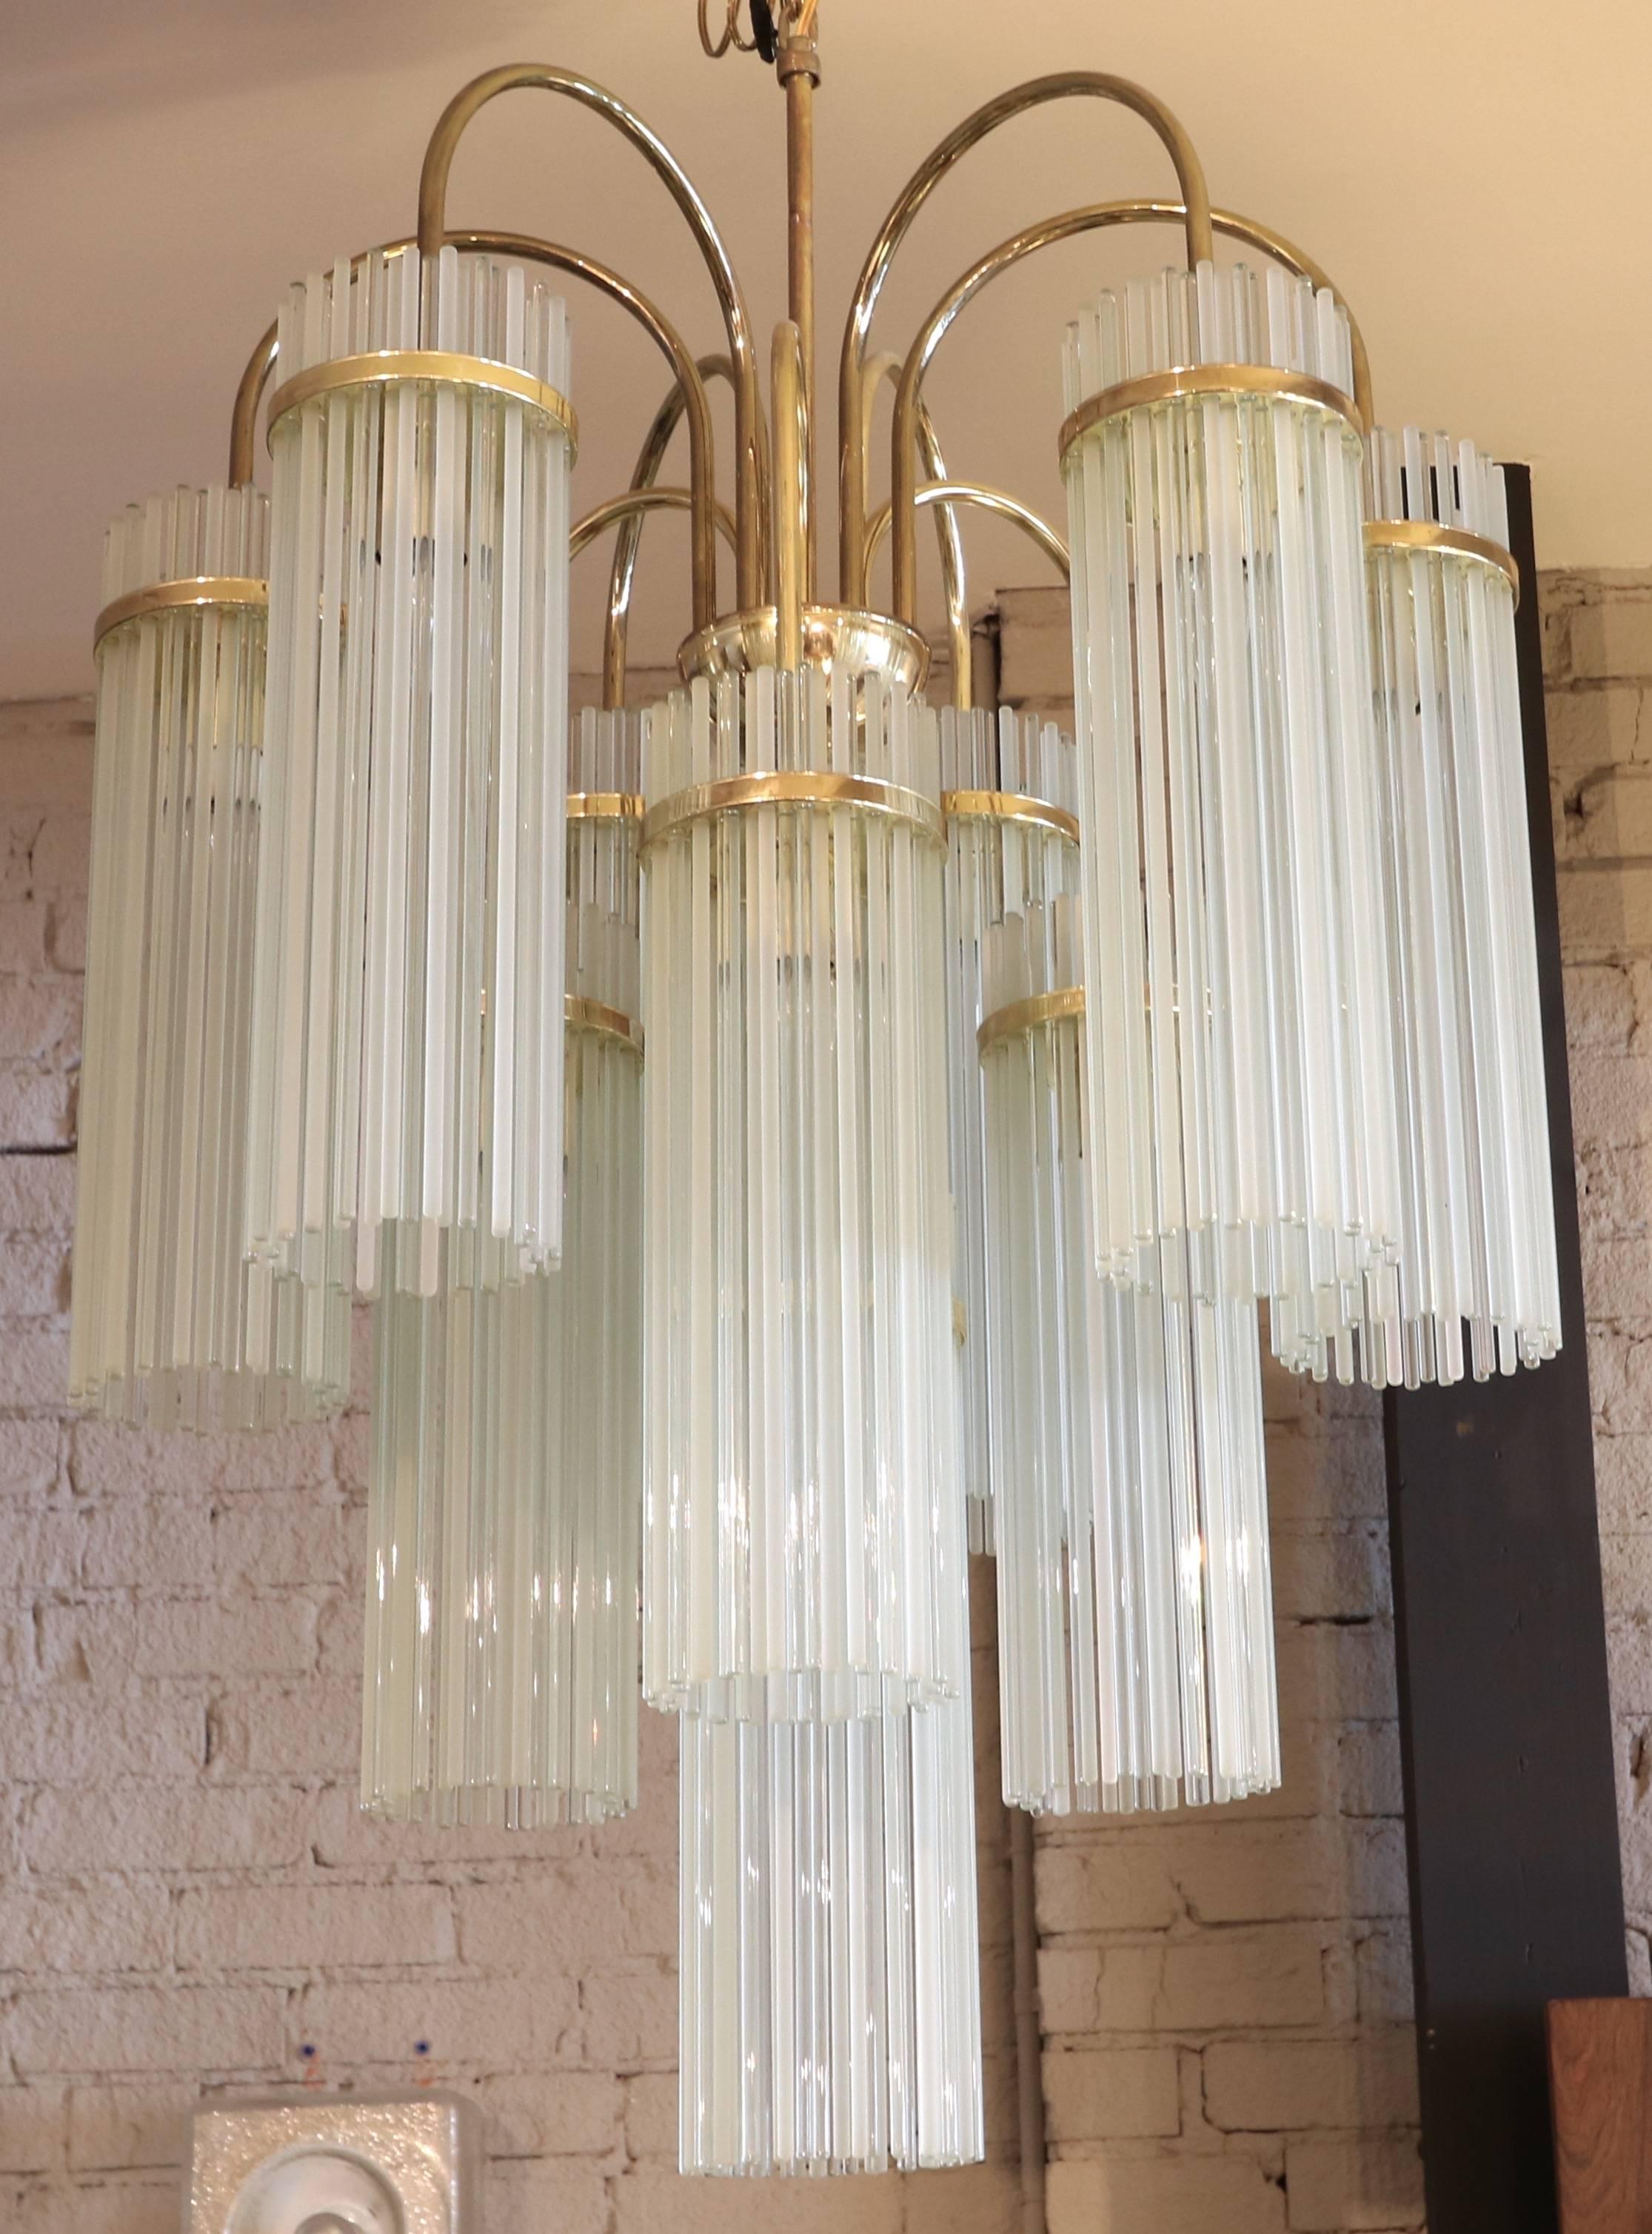 Ten-arm chandelier attributed to Gaetano Sciolari for Lightolier from the 1960s with alternating transparent and frosted glass rods with a brass frame.